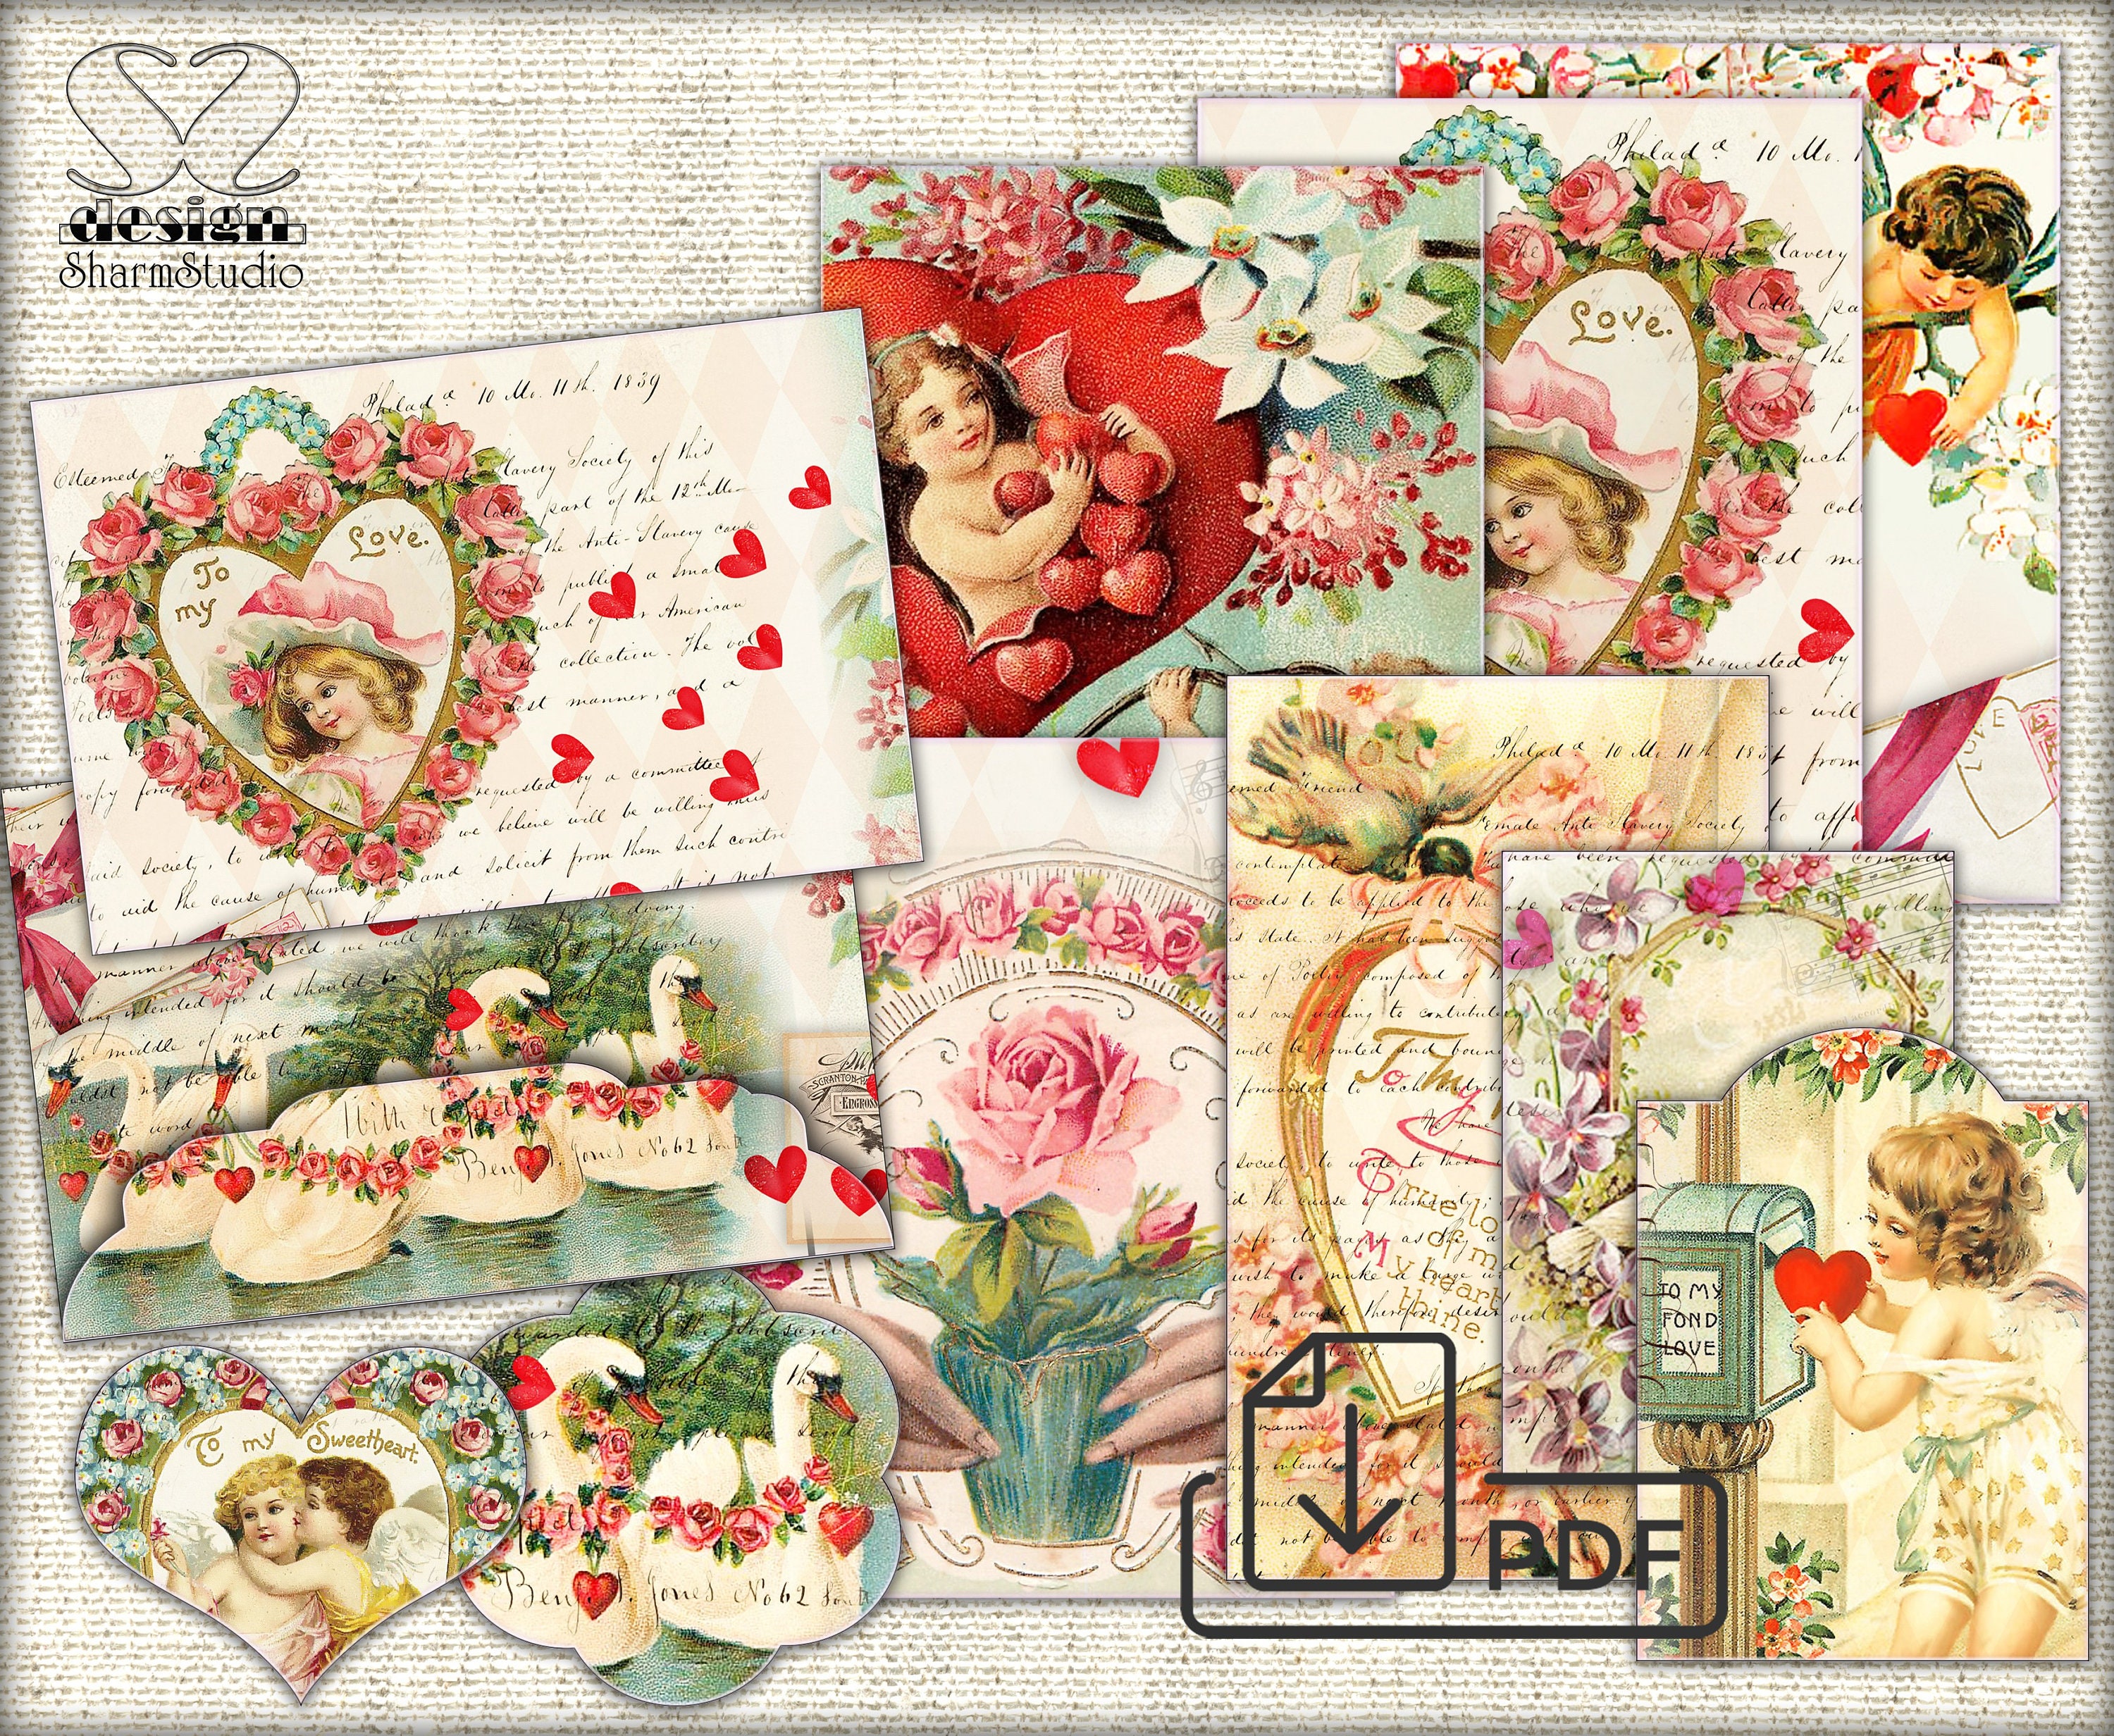 10 FREE Scrapbook Printable Collections for Valentine's Day